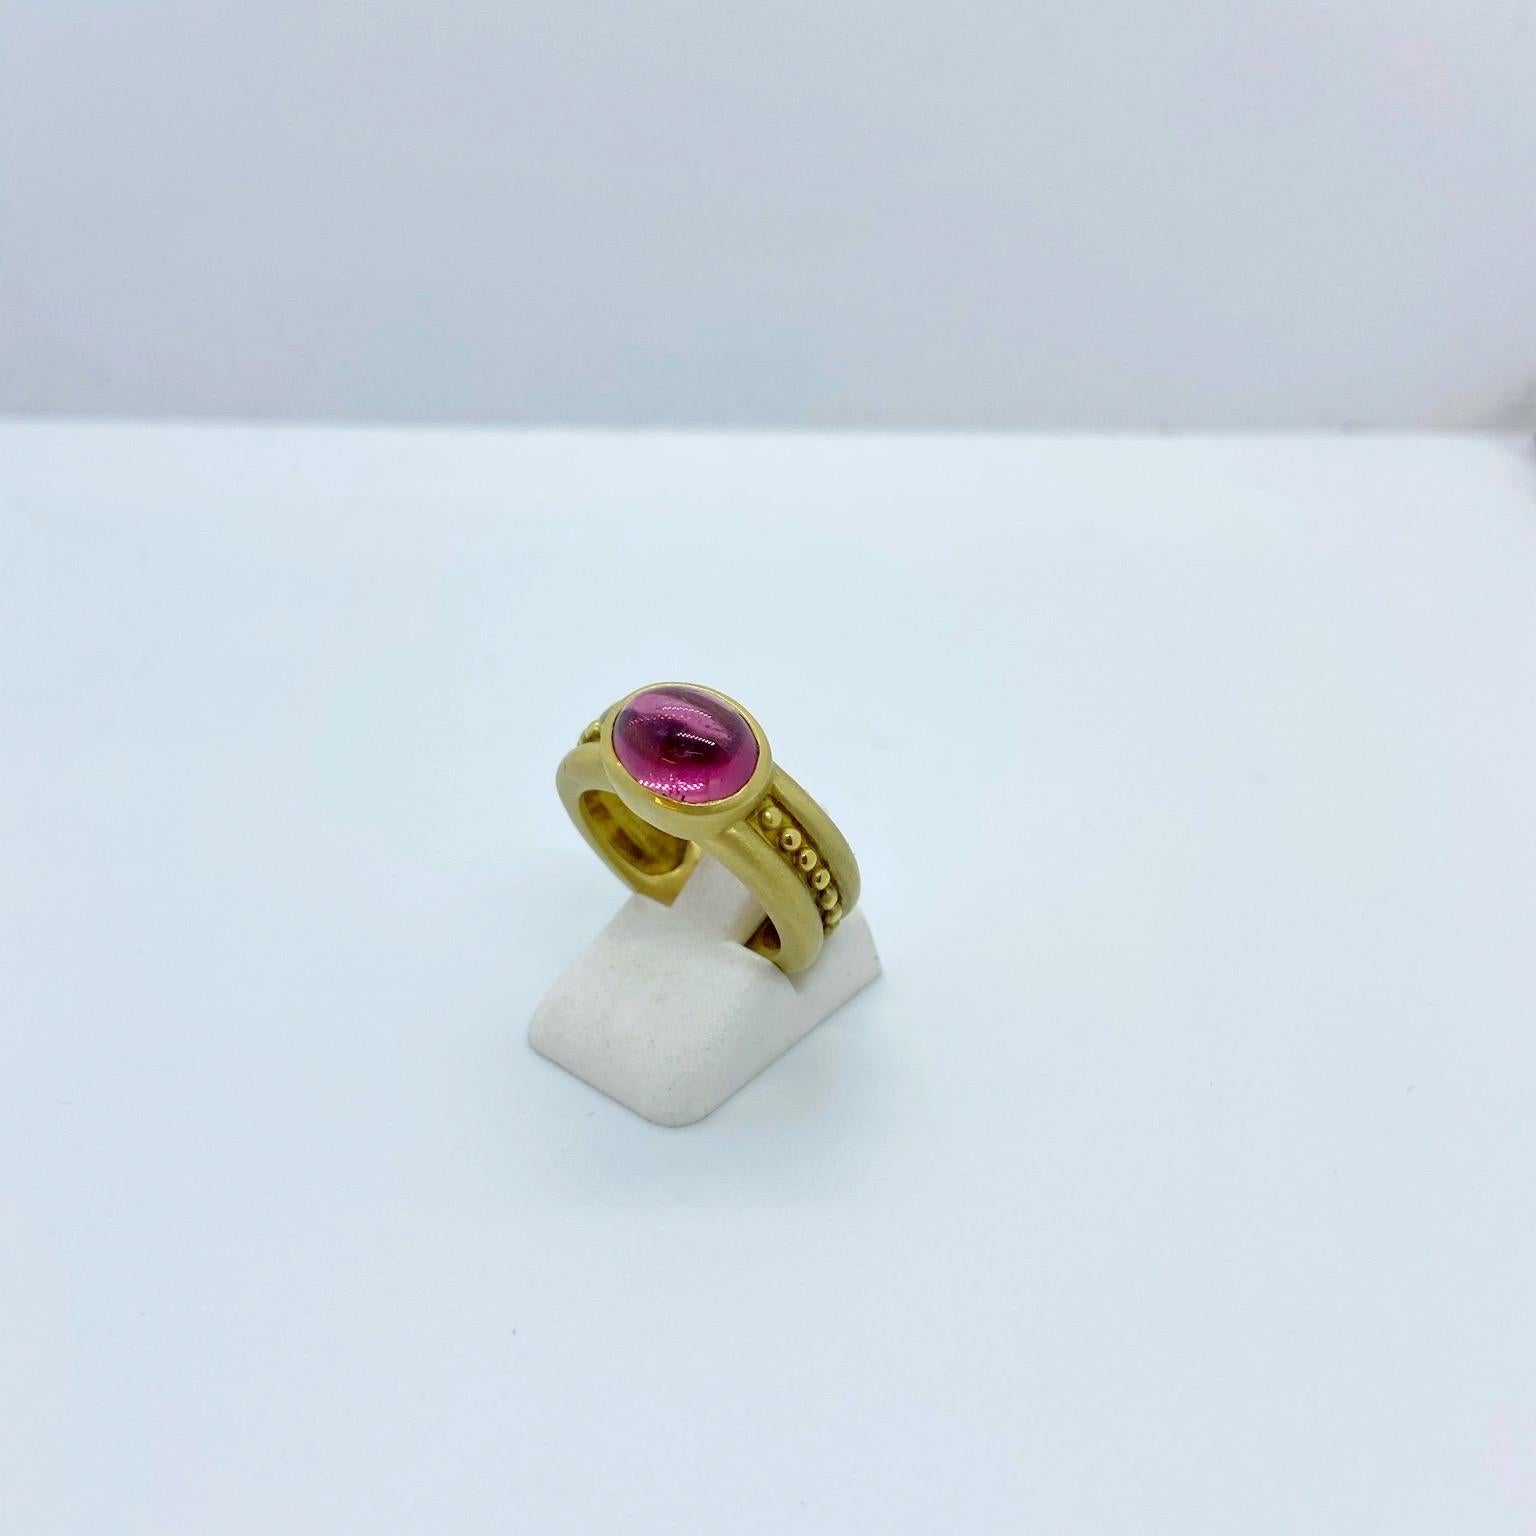 An 18 karat yellow gold ring designed with an oval cabochon pink tourmaline center. The stone is set east /west on a matte shank detailed with gold beads.
Stamped 750
Finger size 6.25